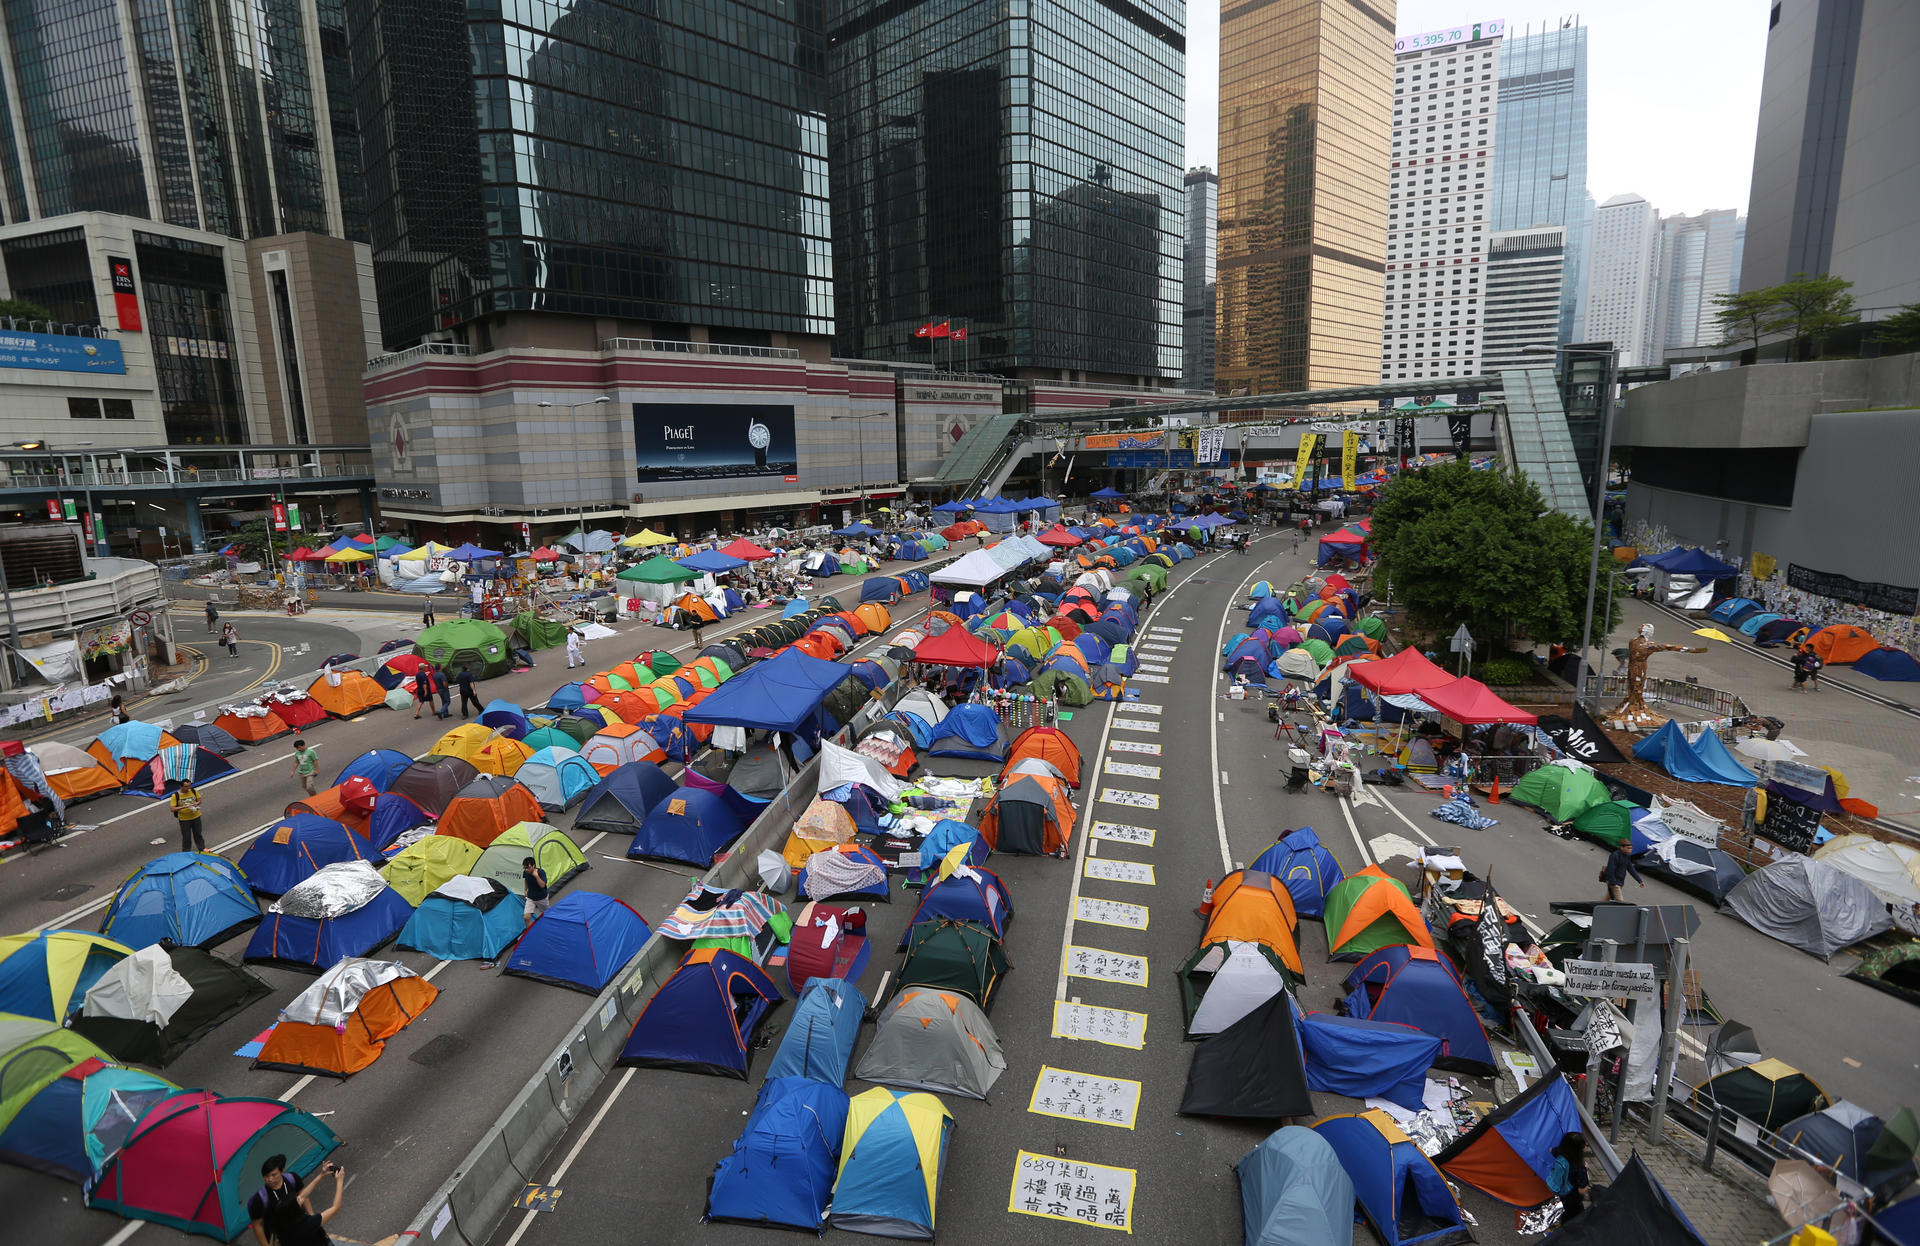 The Hong Kong Marathon could be affected by the ongoing Occupy Central movement, say organisers of the event. Photo: Nora Tam